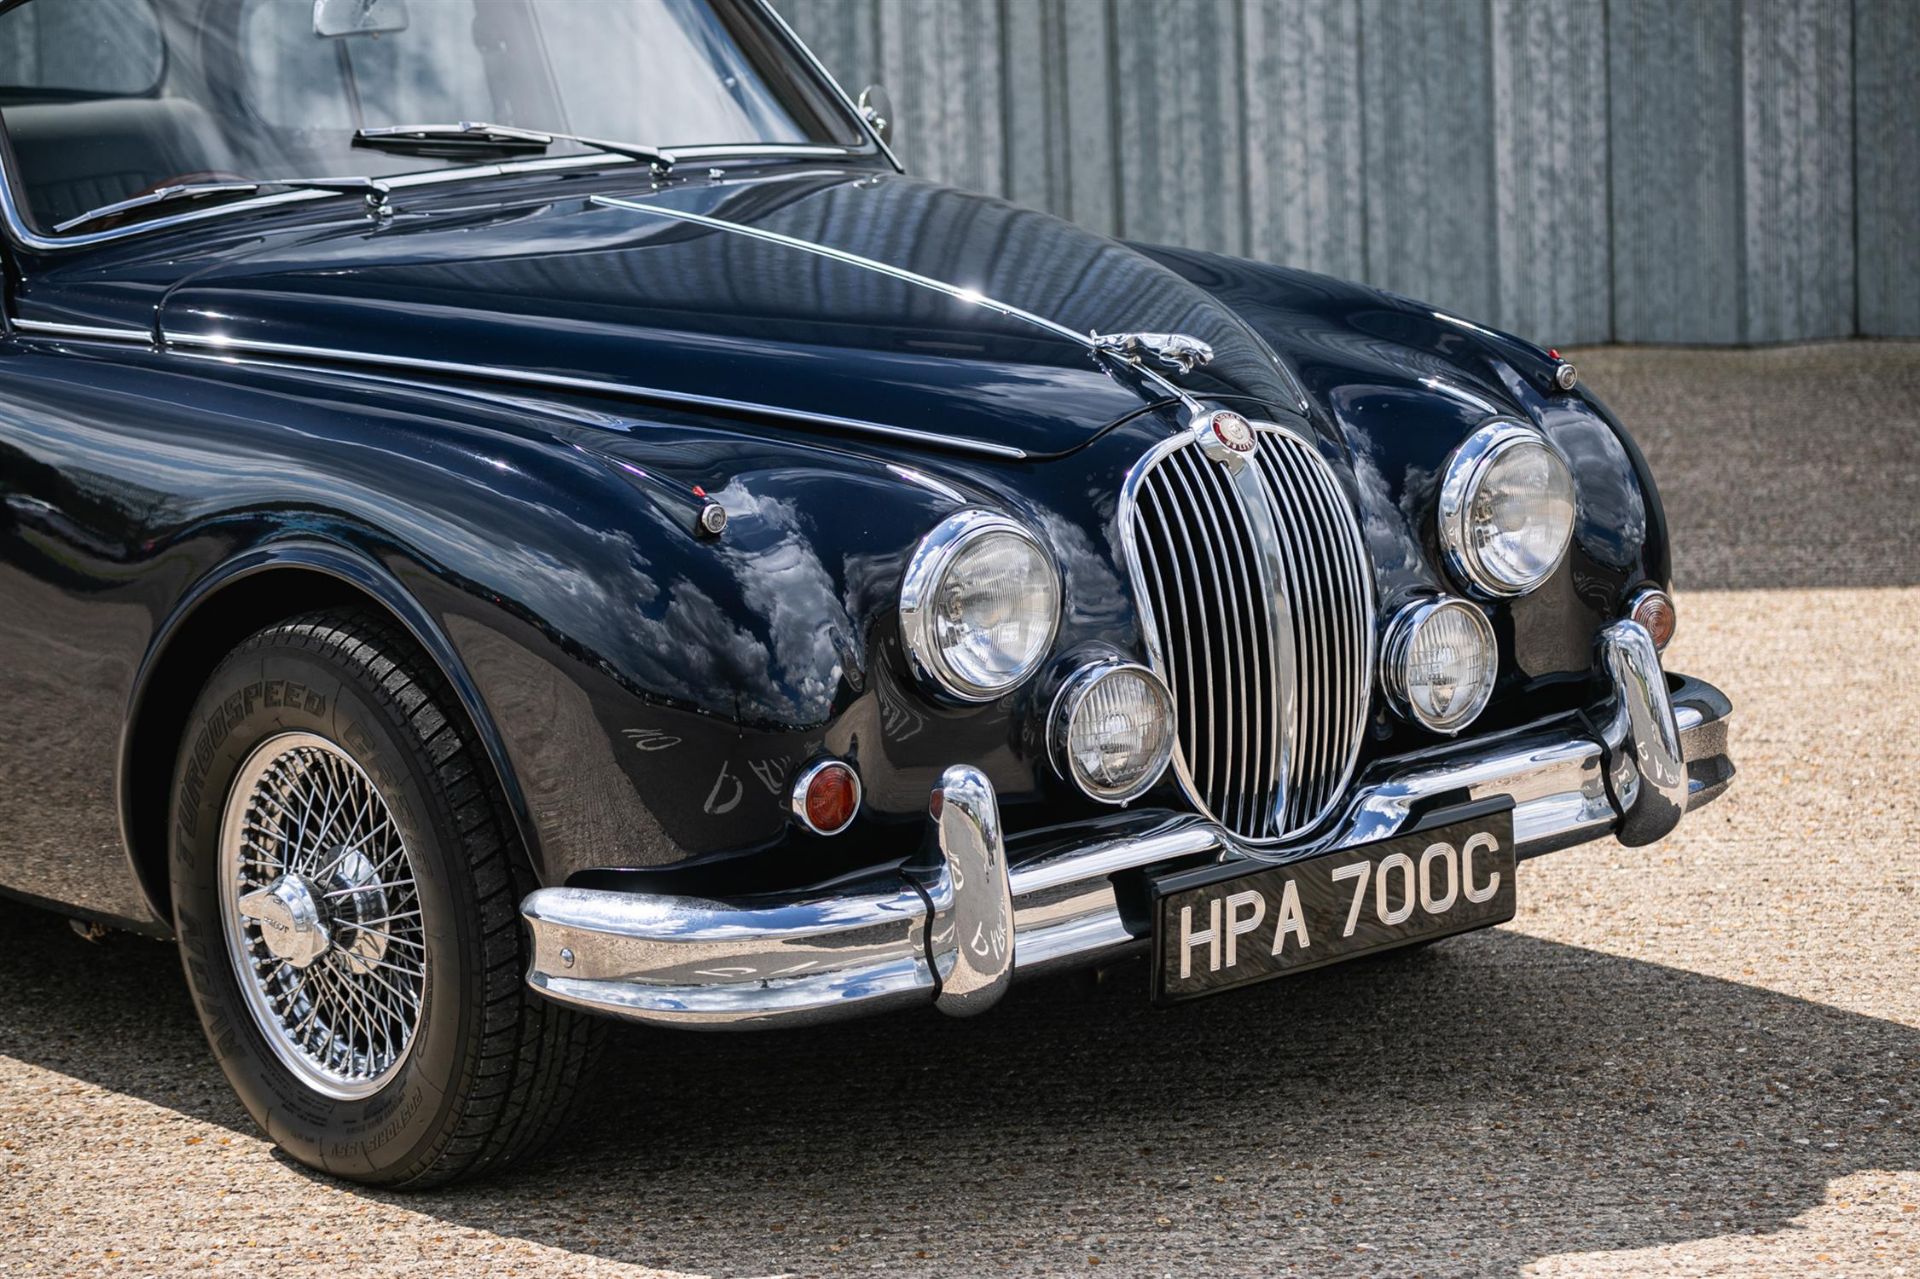 1964 Jaguar Mk2 3.8-Litre 'Coombs'-Style Sports Saloon - Image 8 of 10